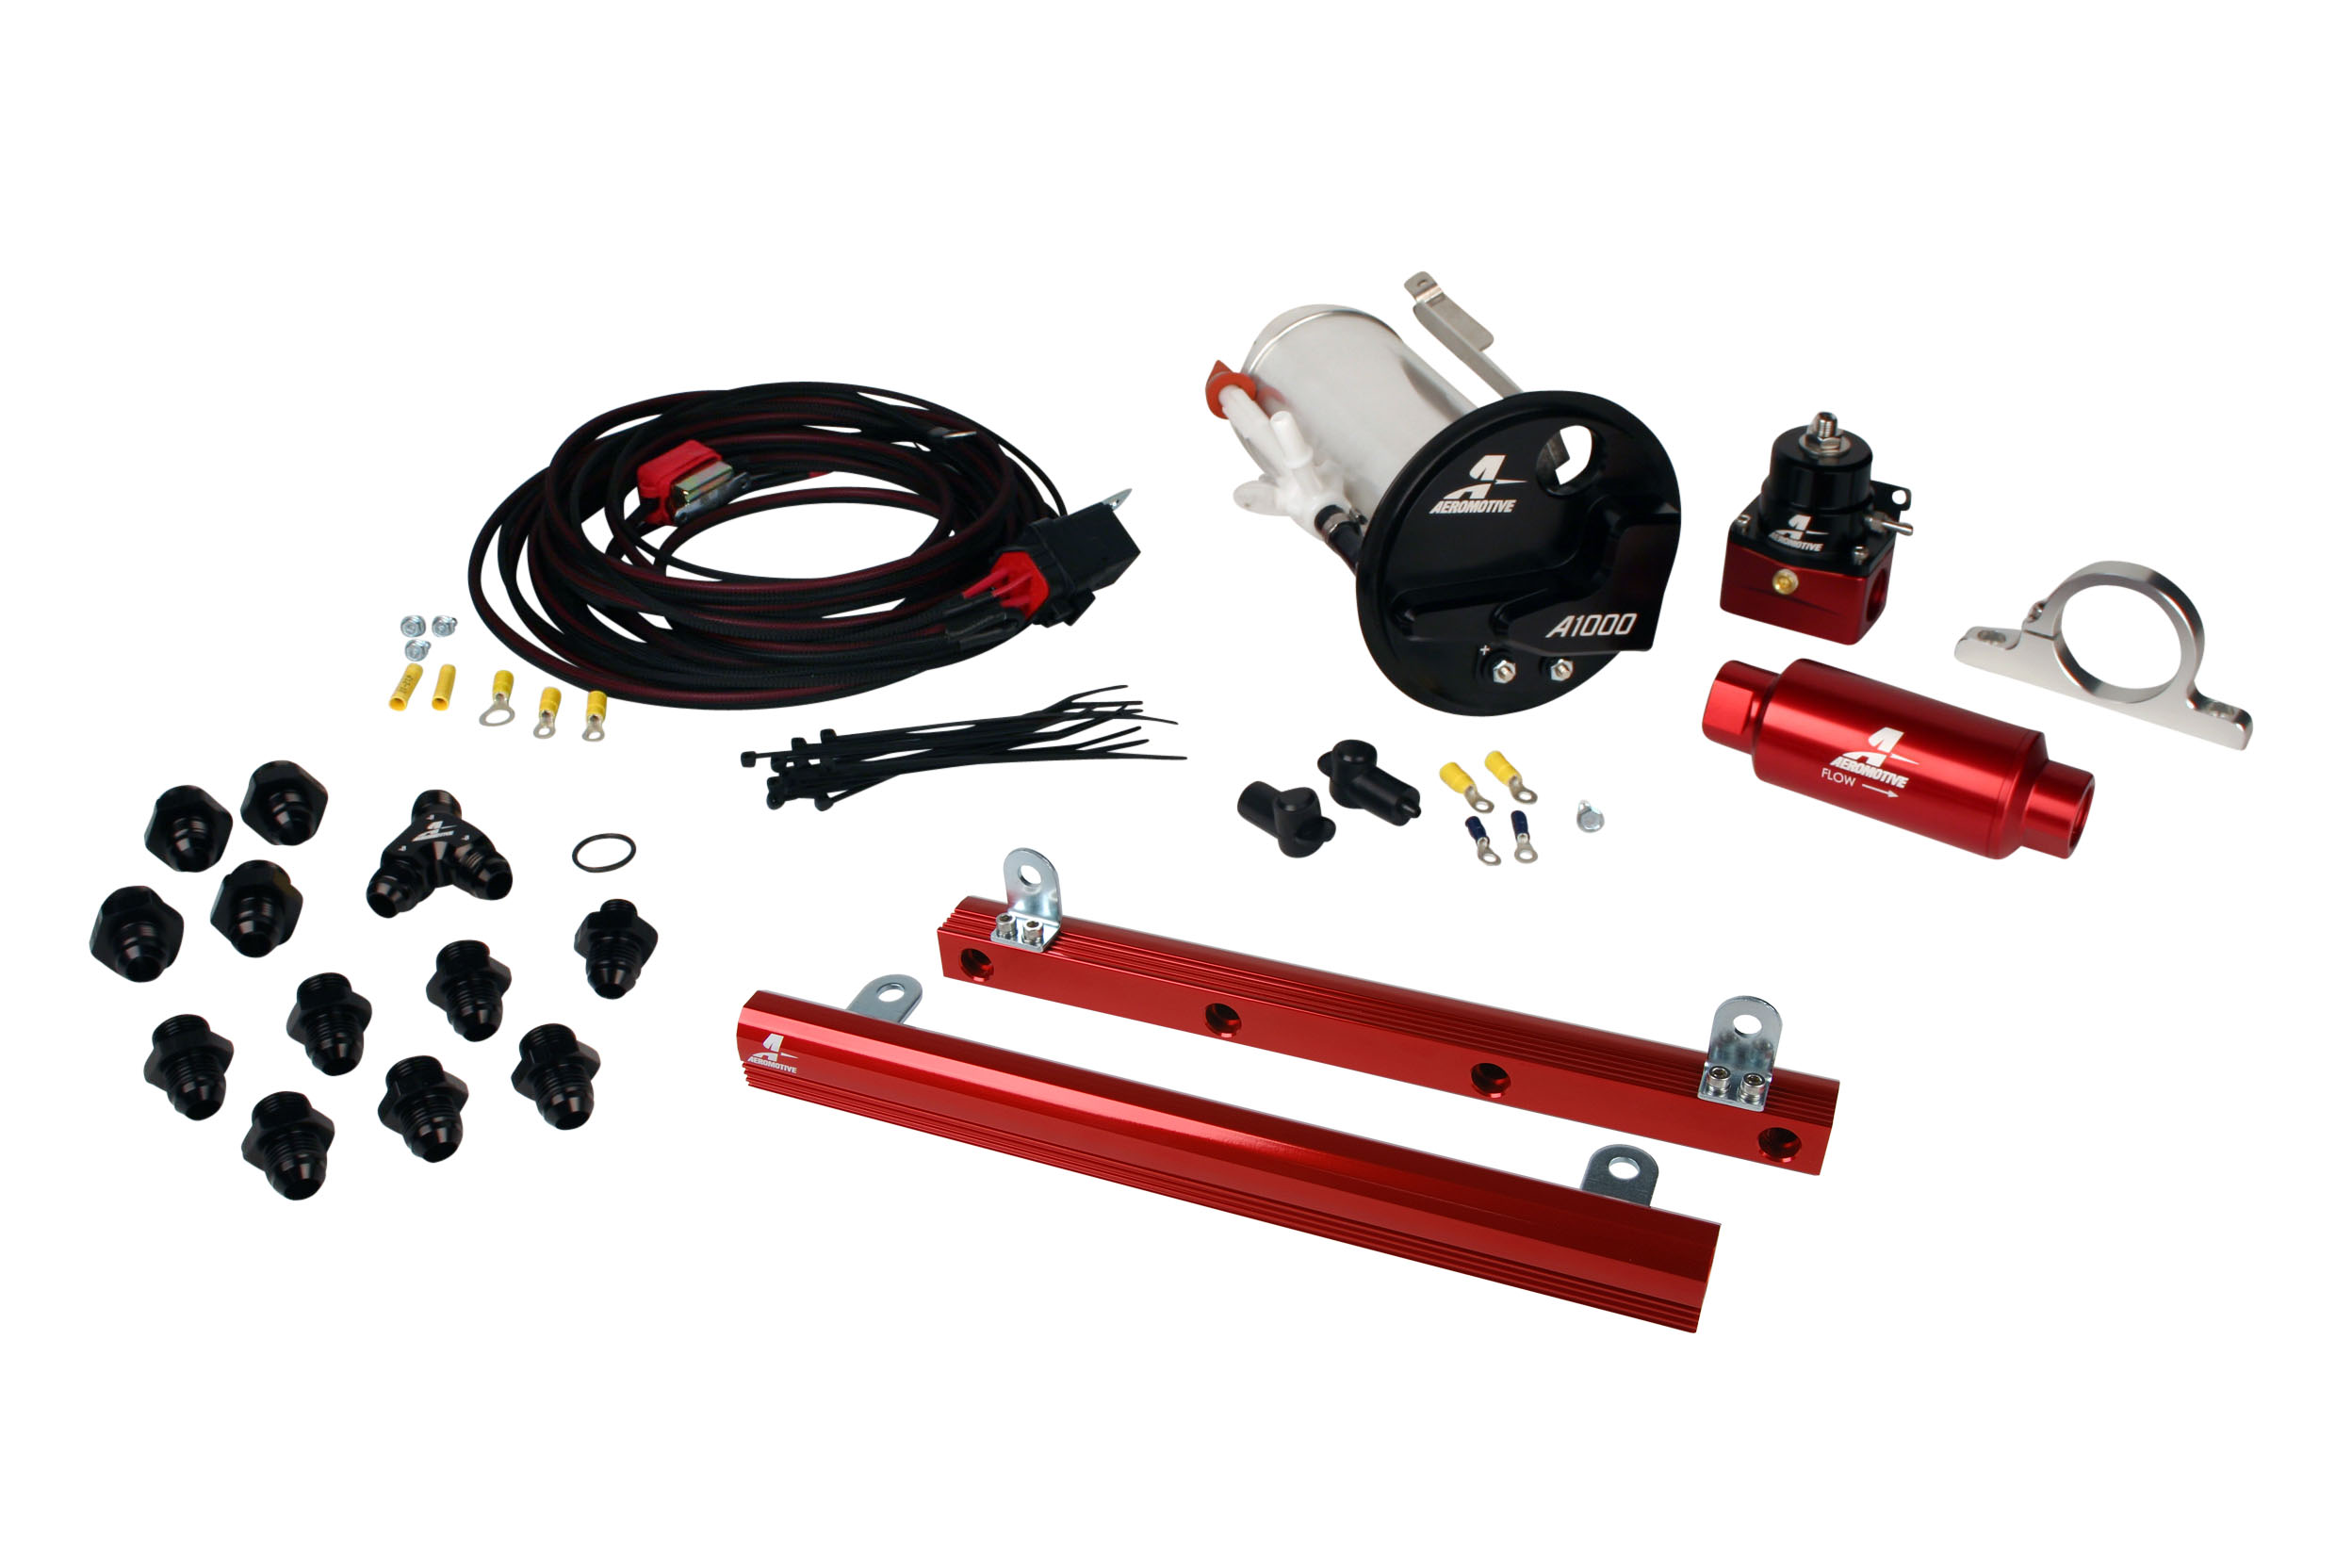 2007-2012 Ford Mustang Shelby GT500 Aeromotive Stealth A1000 Race Fuel System w/5.4L 4-V Fuel Rails